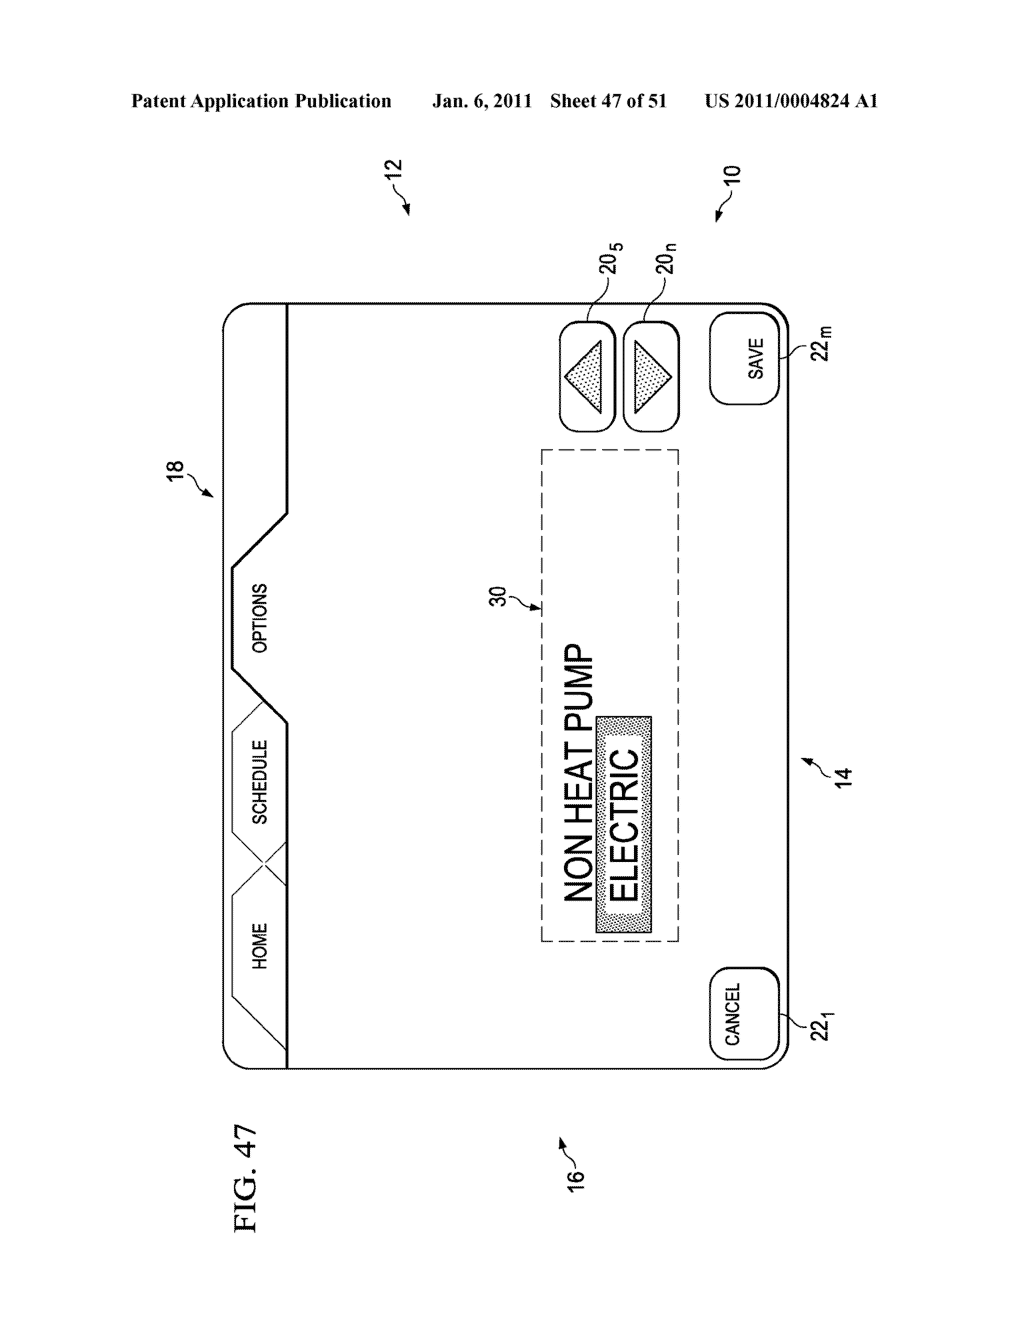 DISPLAY APPARATUS AND METHOD HAVING TEXTUAL SYSTEM STATUS MESSAGE DISPLAY CAPABILITY FOR AN ENVIROMENTAL CONTROL SYSTEM - diagram, schematic, and image 48